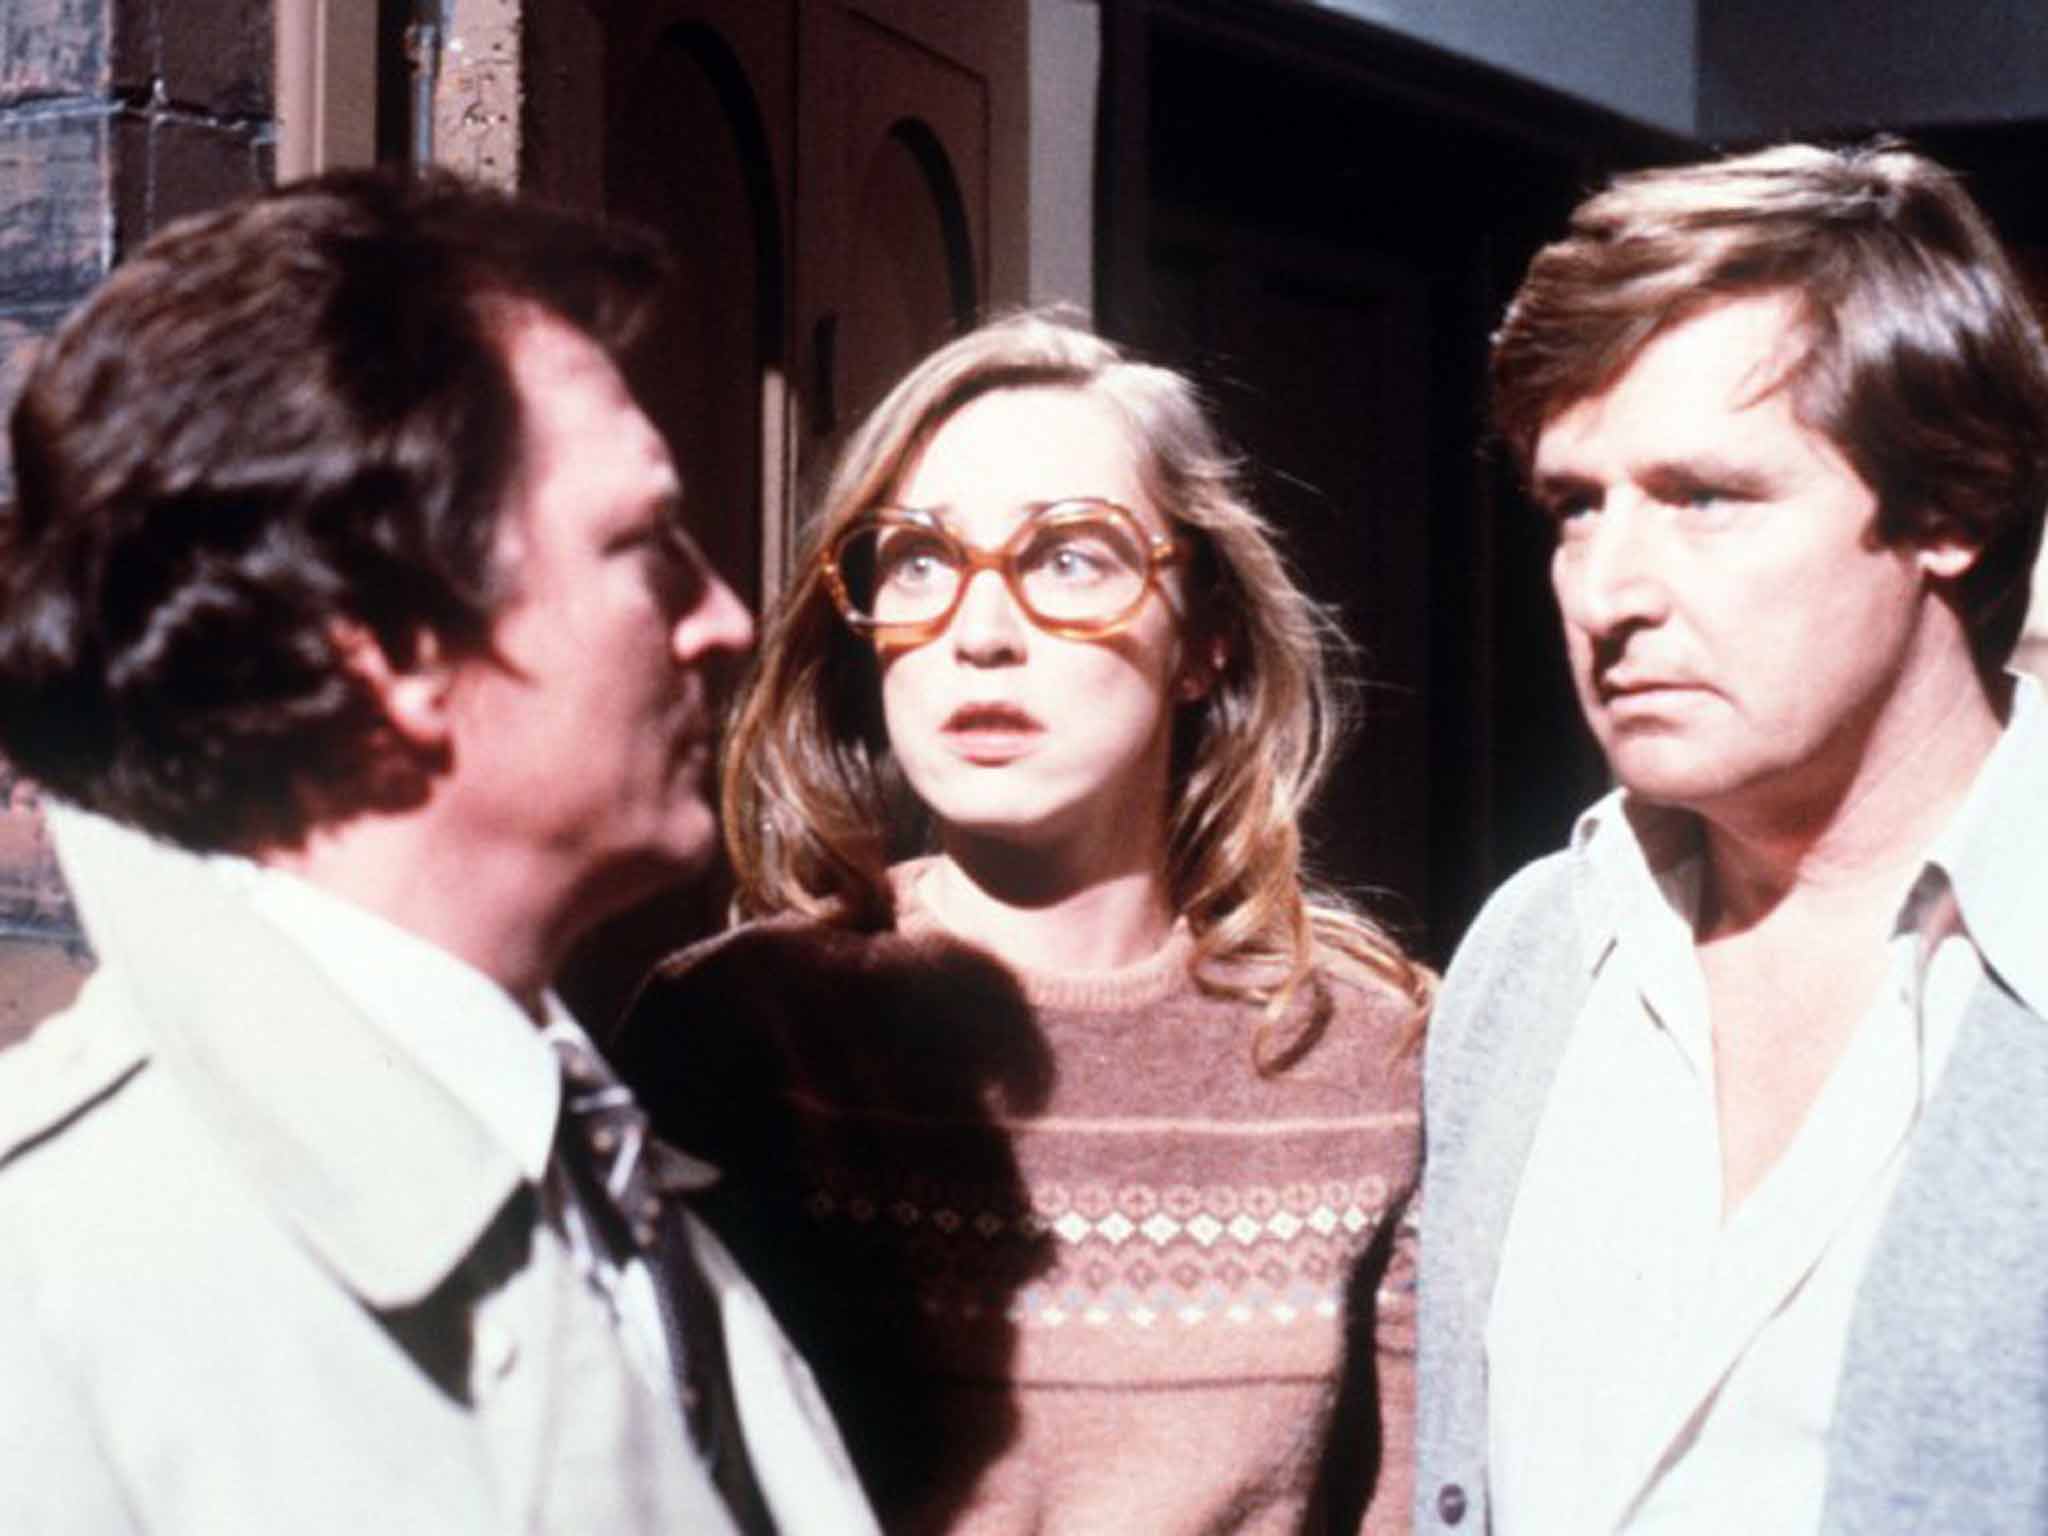 Kirkbride with Johnny Briggs, left, as Mike Baldwin, and William Roache as Ken Barlow: their love triangle was the most celebrated storyline in 'Street' history